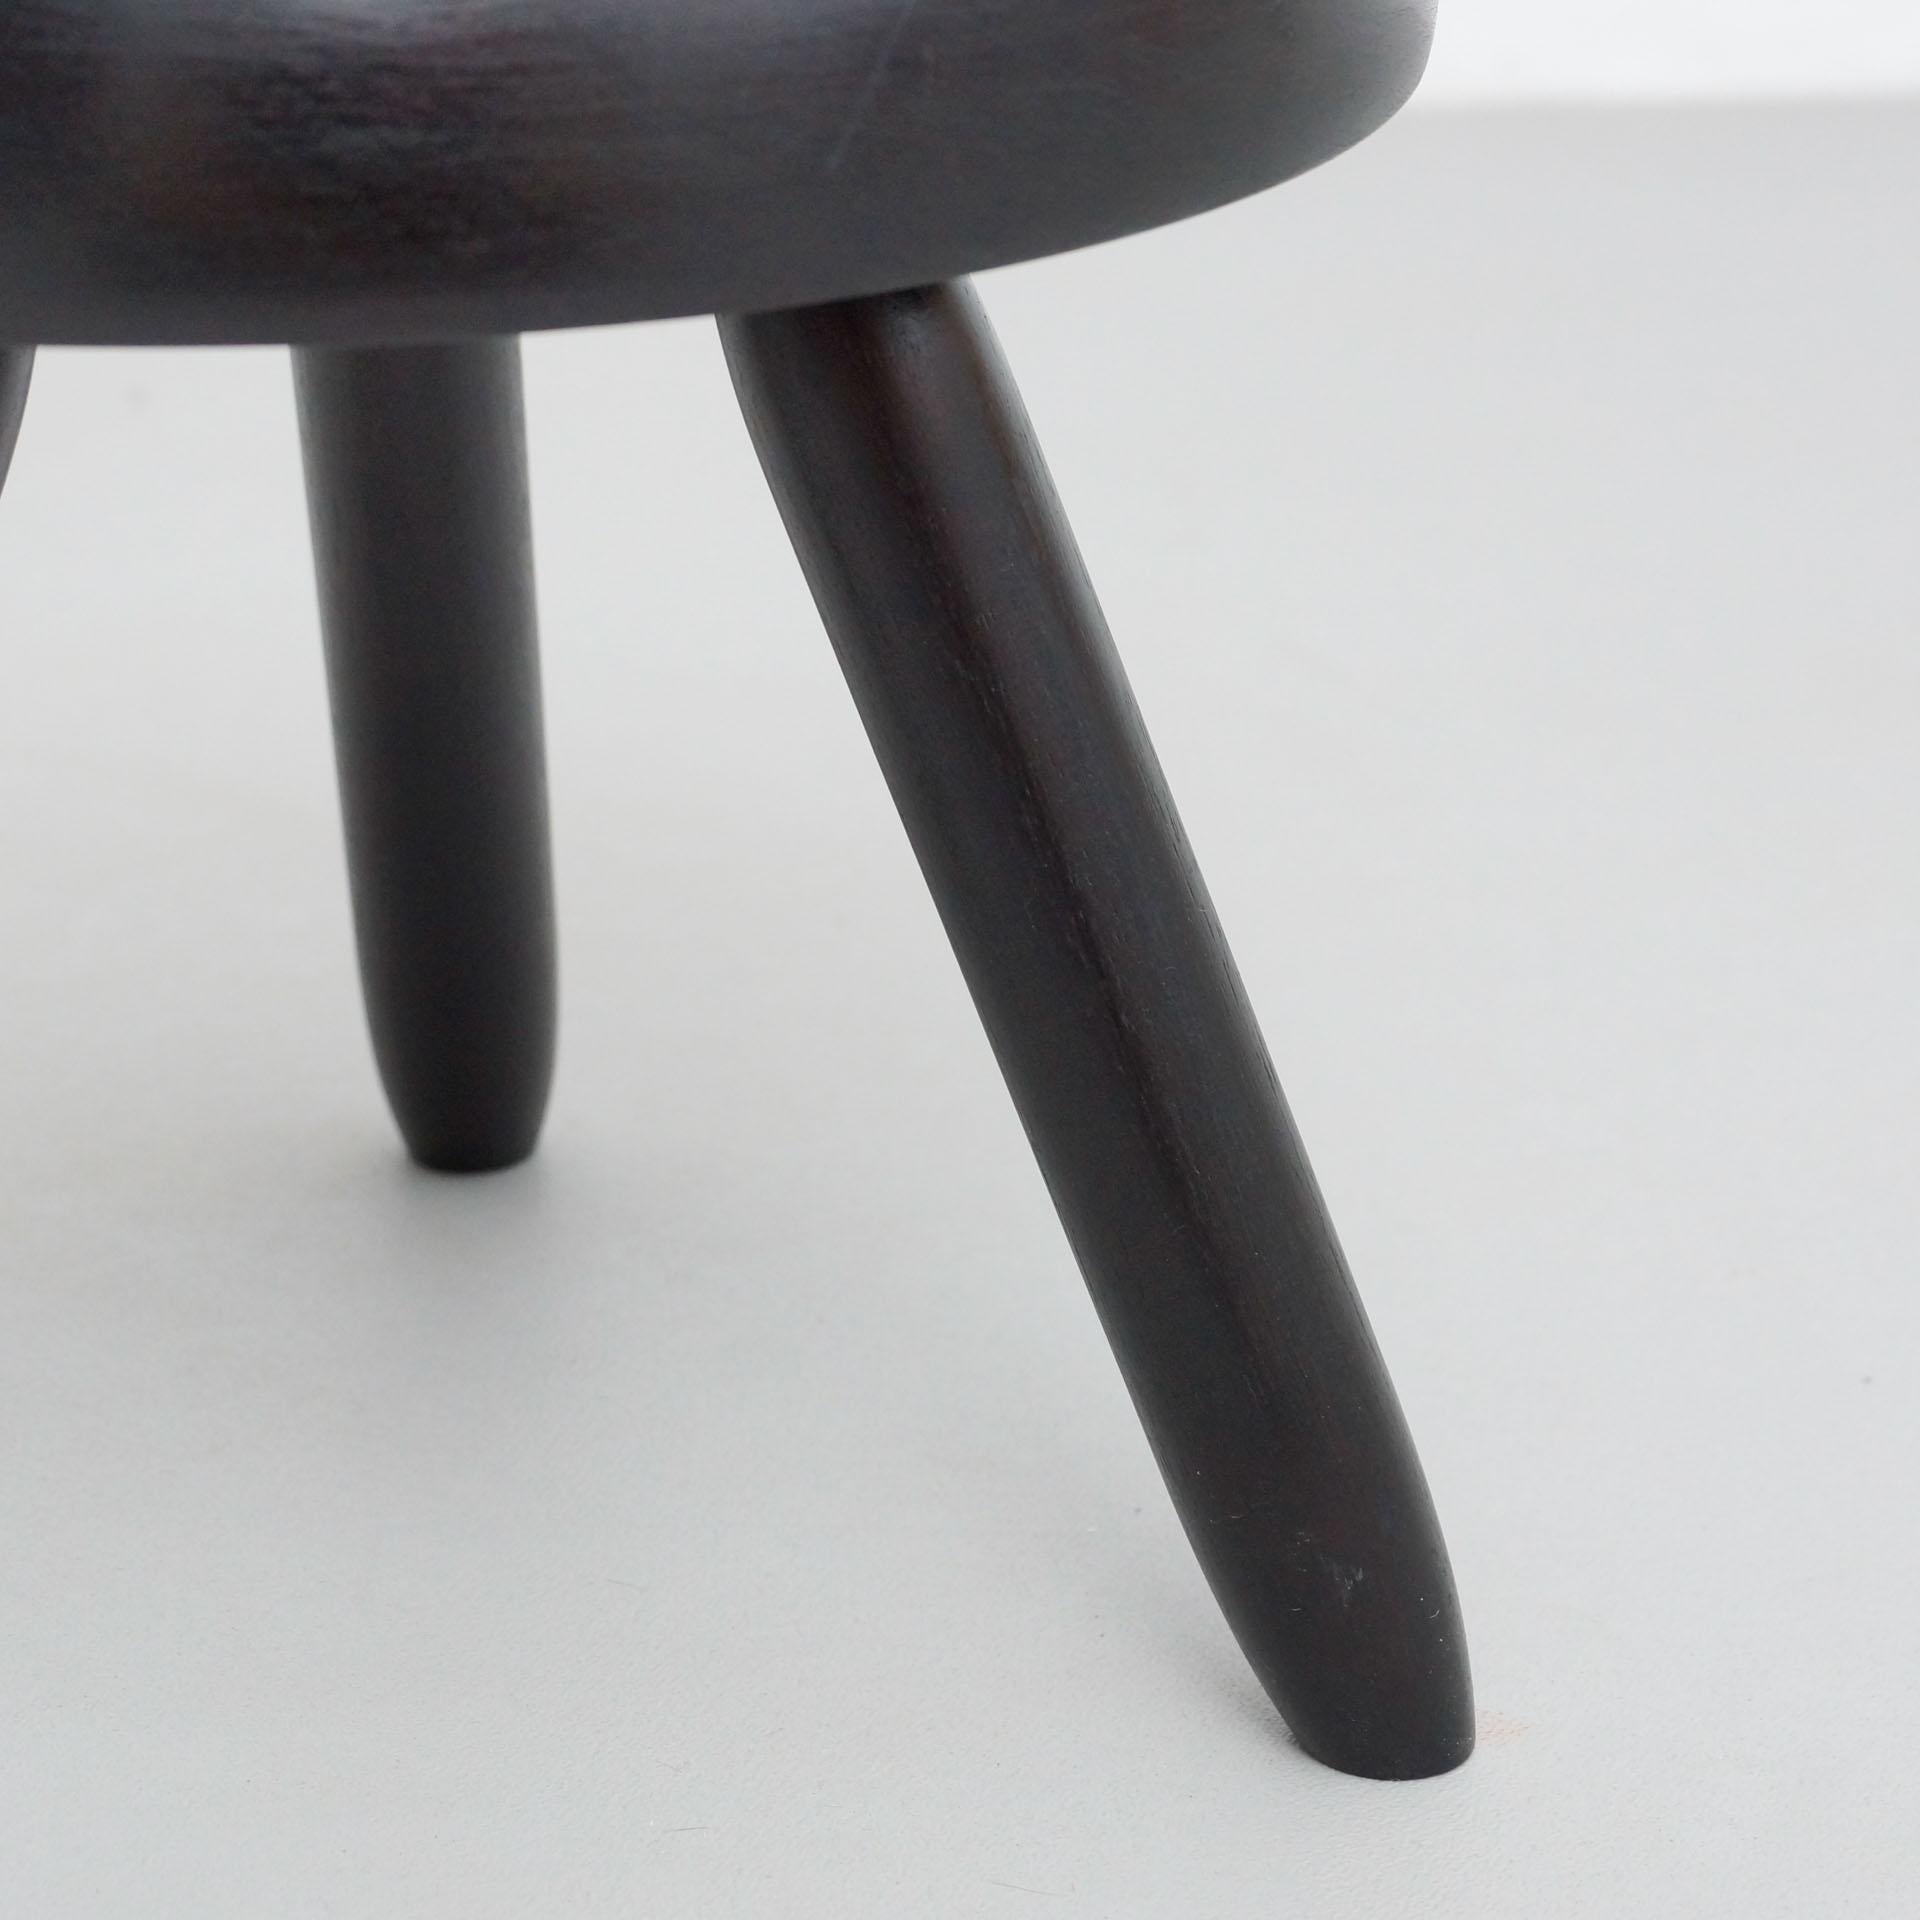 Mid-Century Modern Wood Tripod Stool in the Style of Charlotte Perriand 4